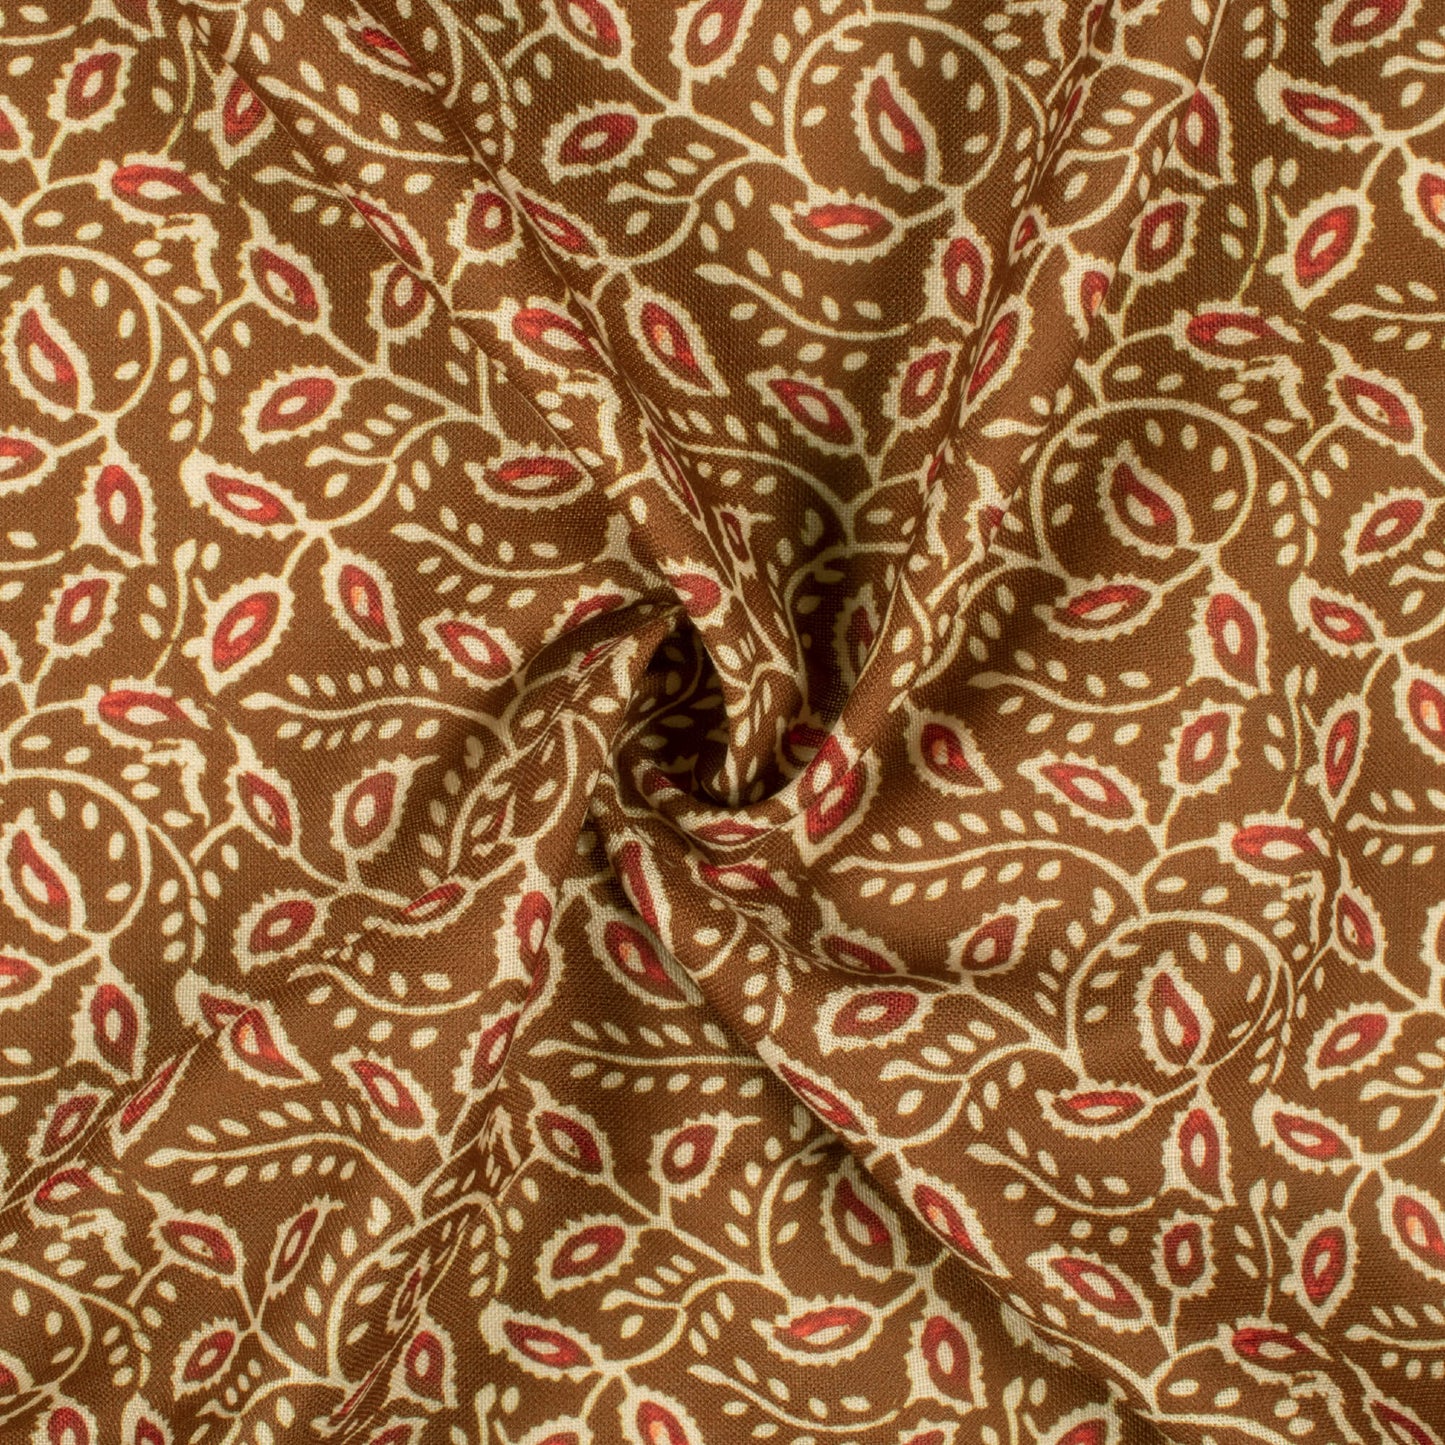 Dark Brown And Red Leaf Pattern Digital Print Linen Textured Fabric (Width 56 Inches)